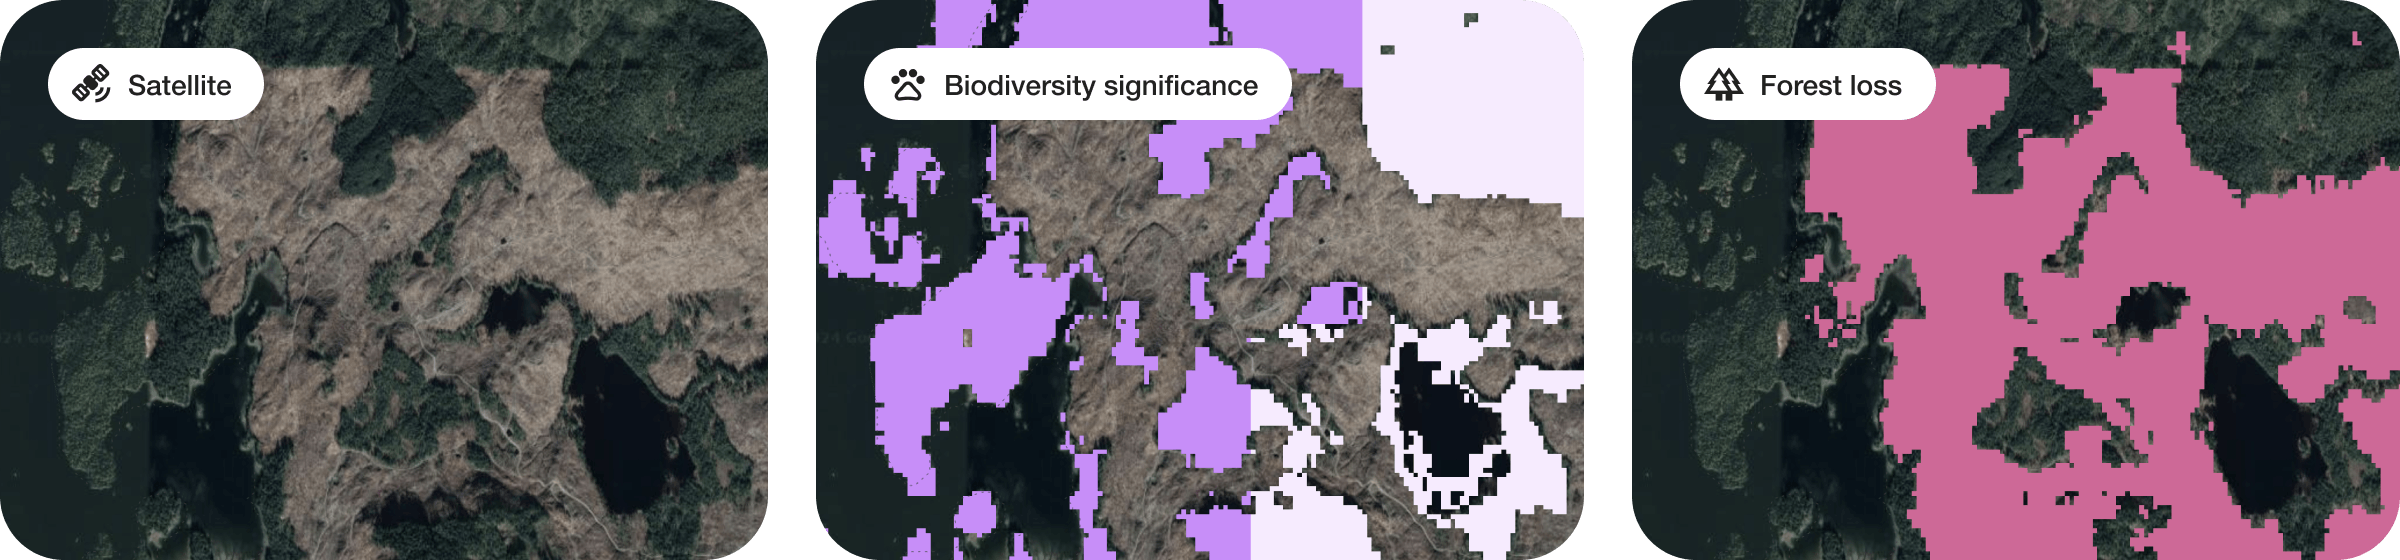 A comparison of forest biodiversity significance, satellite and forest loss maps to show the impact of heavy deforestation nearby the Kootznoowoo project area.